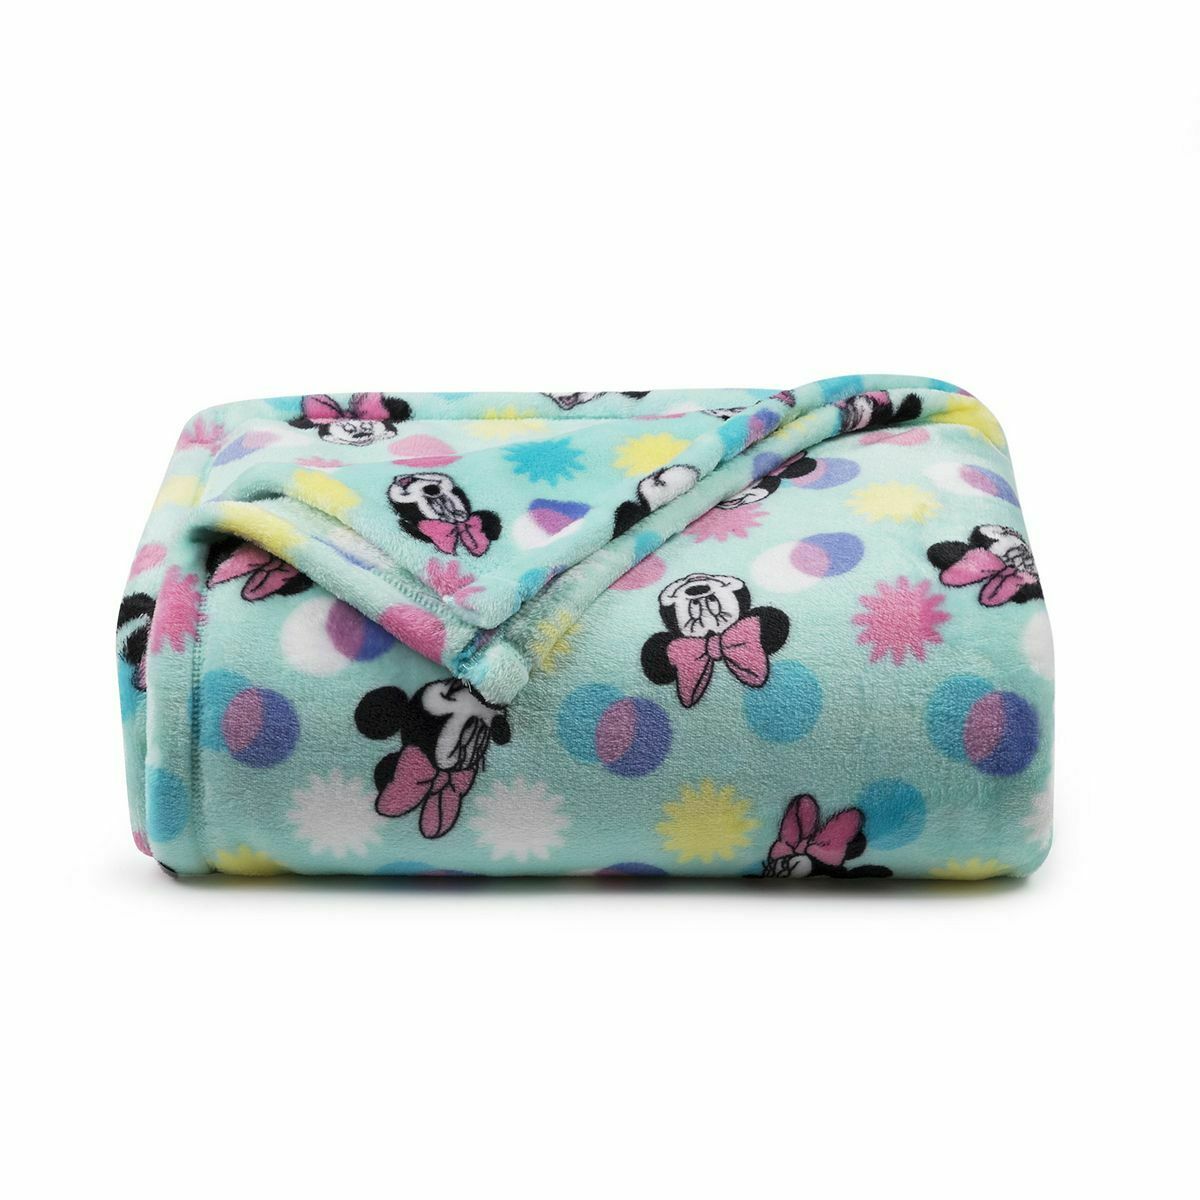 Disney's Minnie Mouse The Big One Oversized Supersoft Printed Plush Throw 5x6